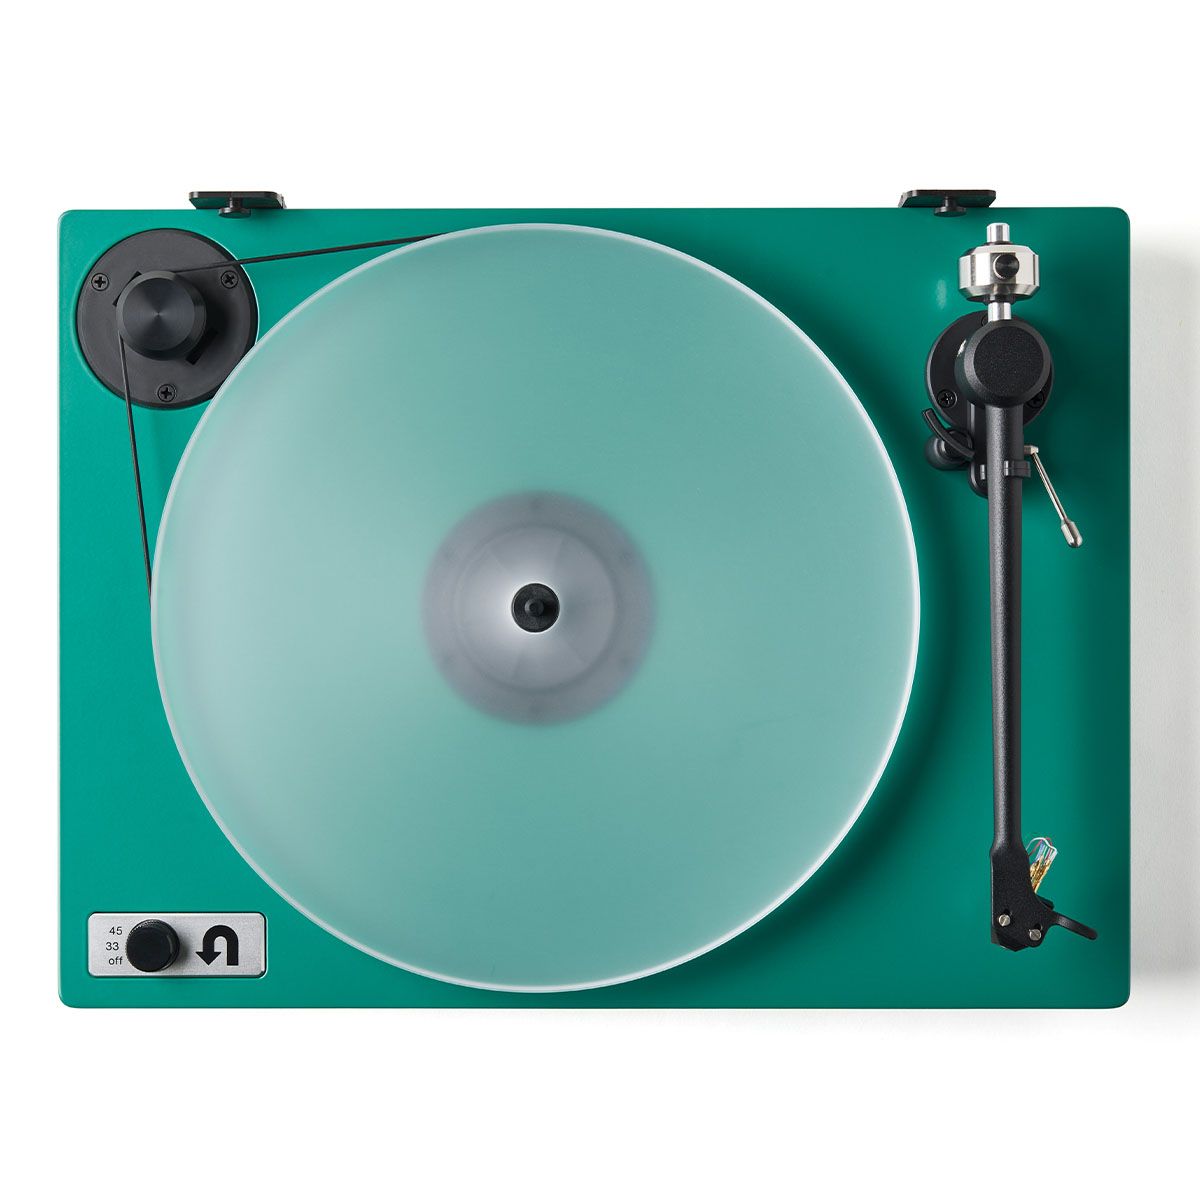 U-Turn Audio Orbit 2 Special Turntable photographed from the top in green